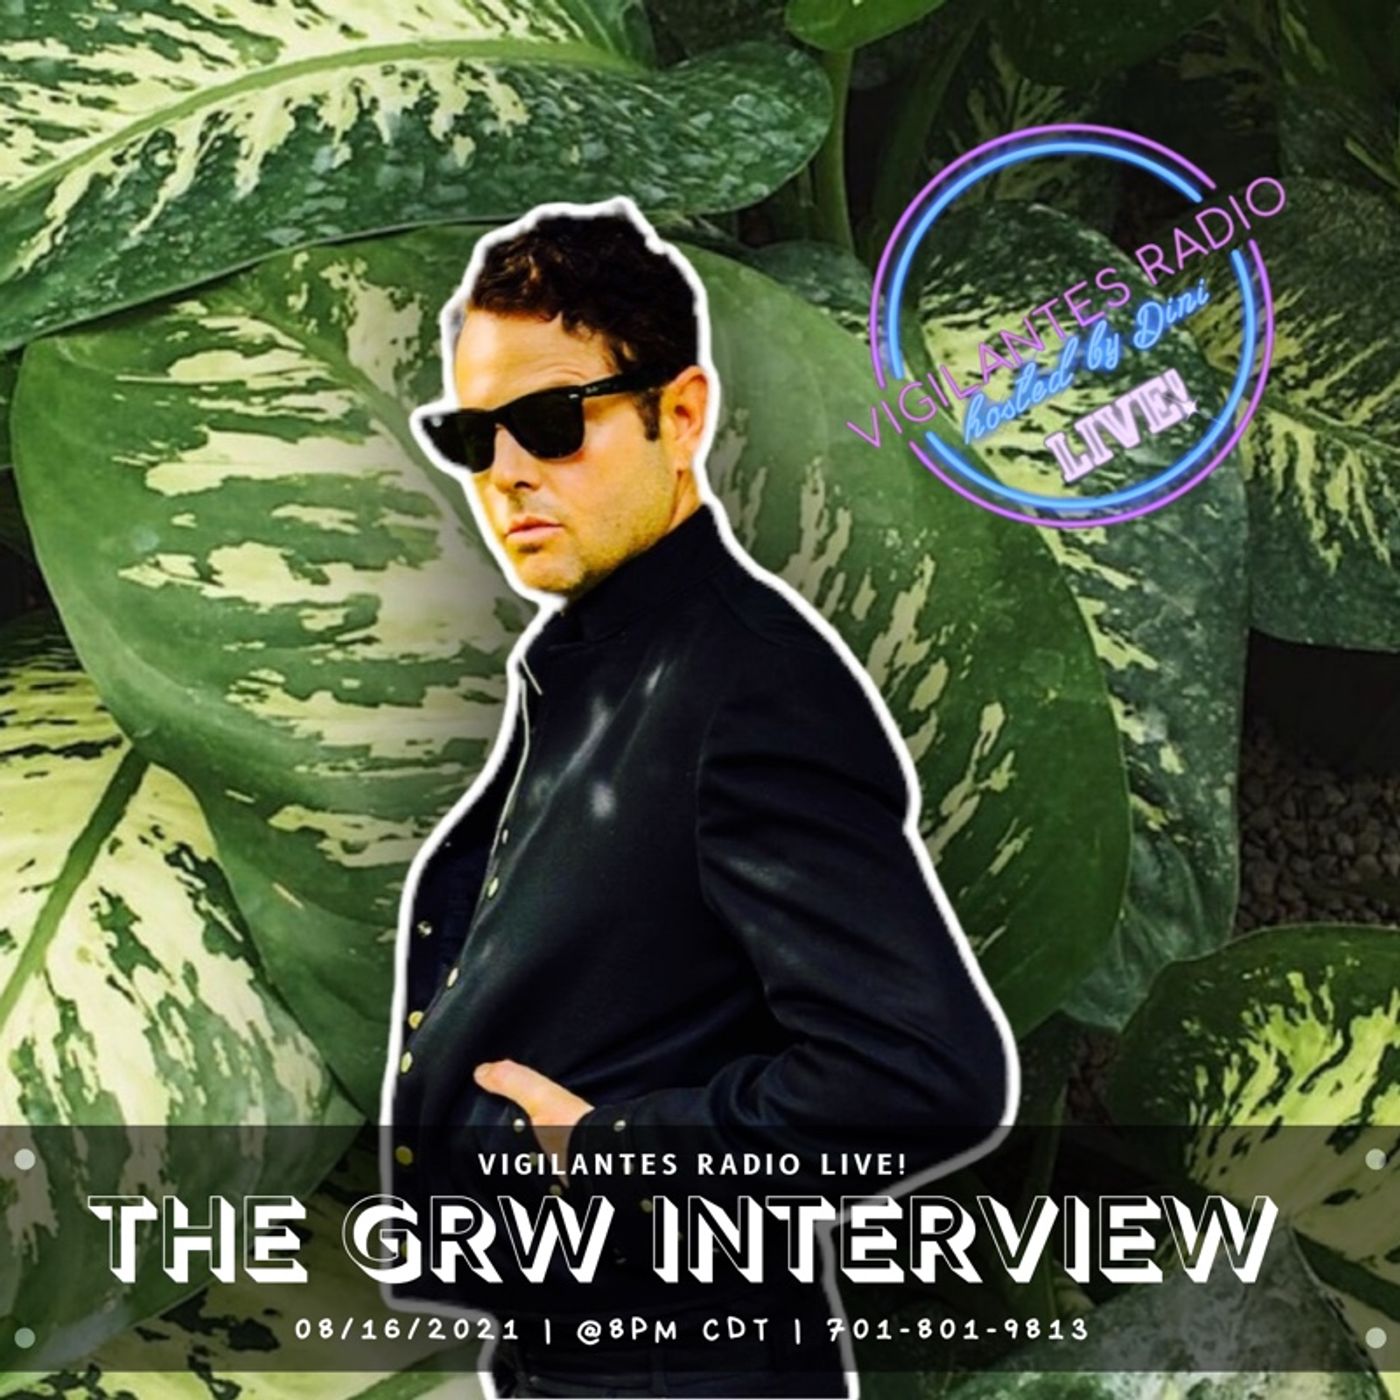 The GRW Interview. Image